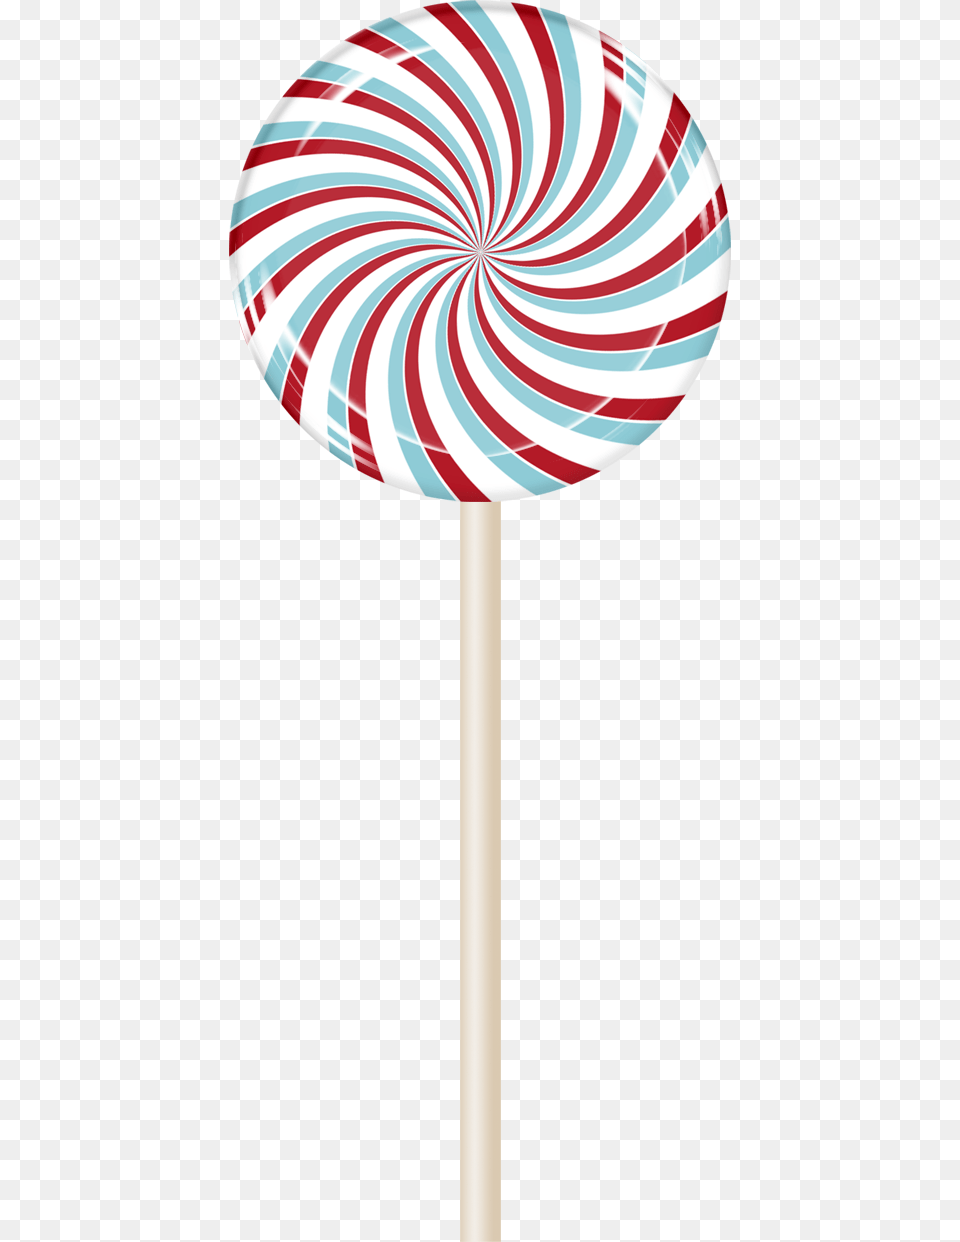 Candy Flag Of The United States, Food, Lollipop, Sweets Png Image